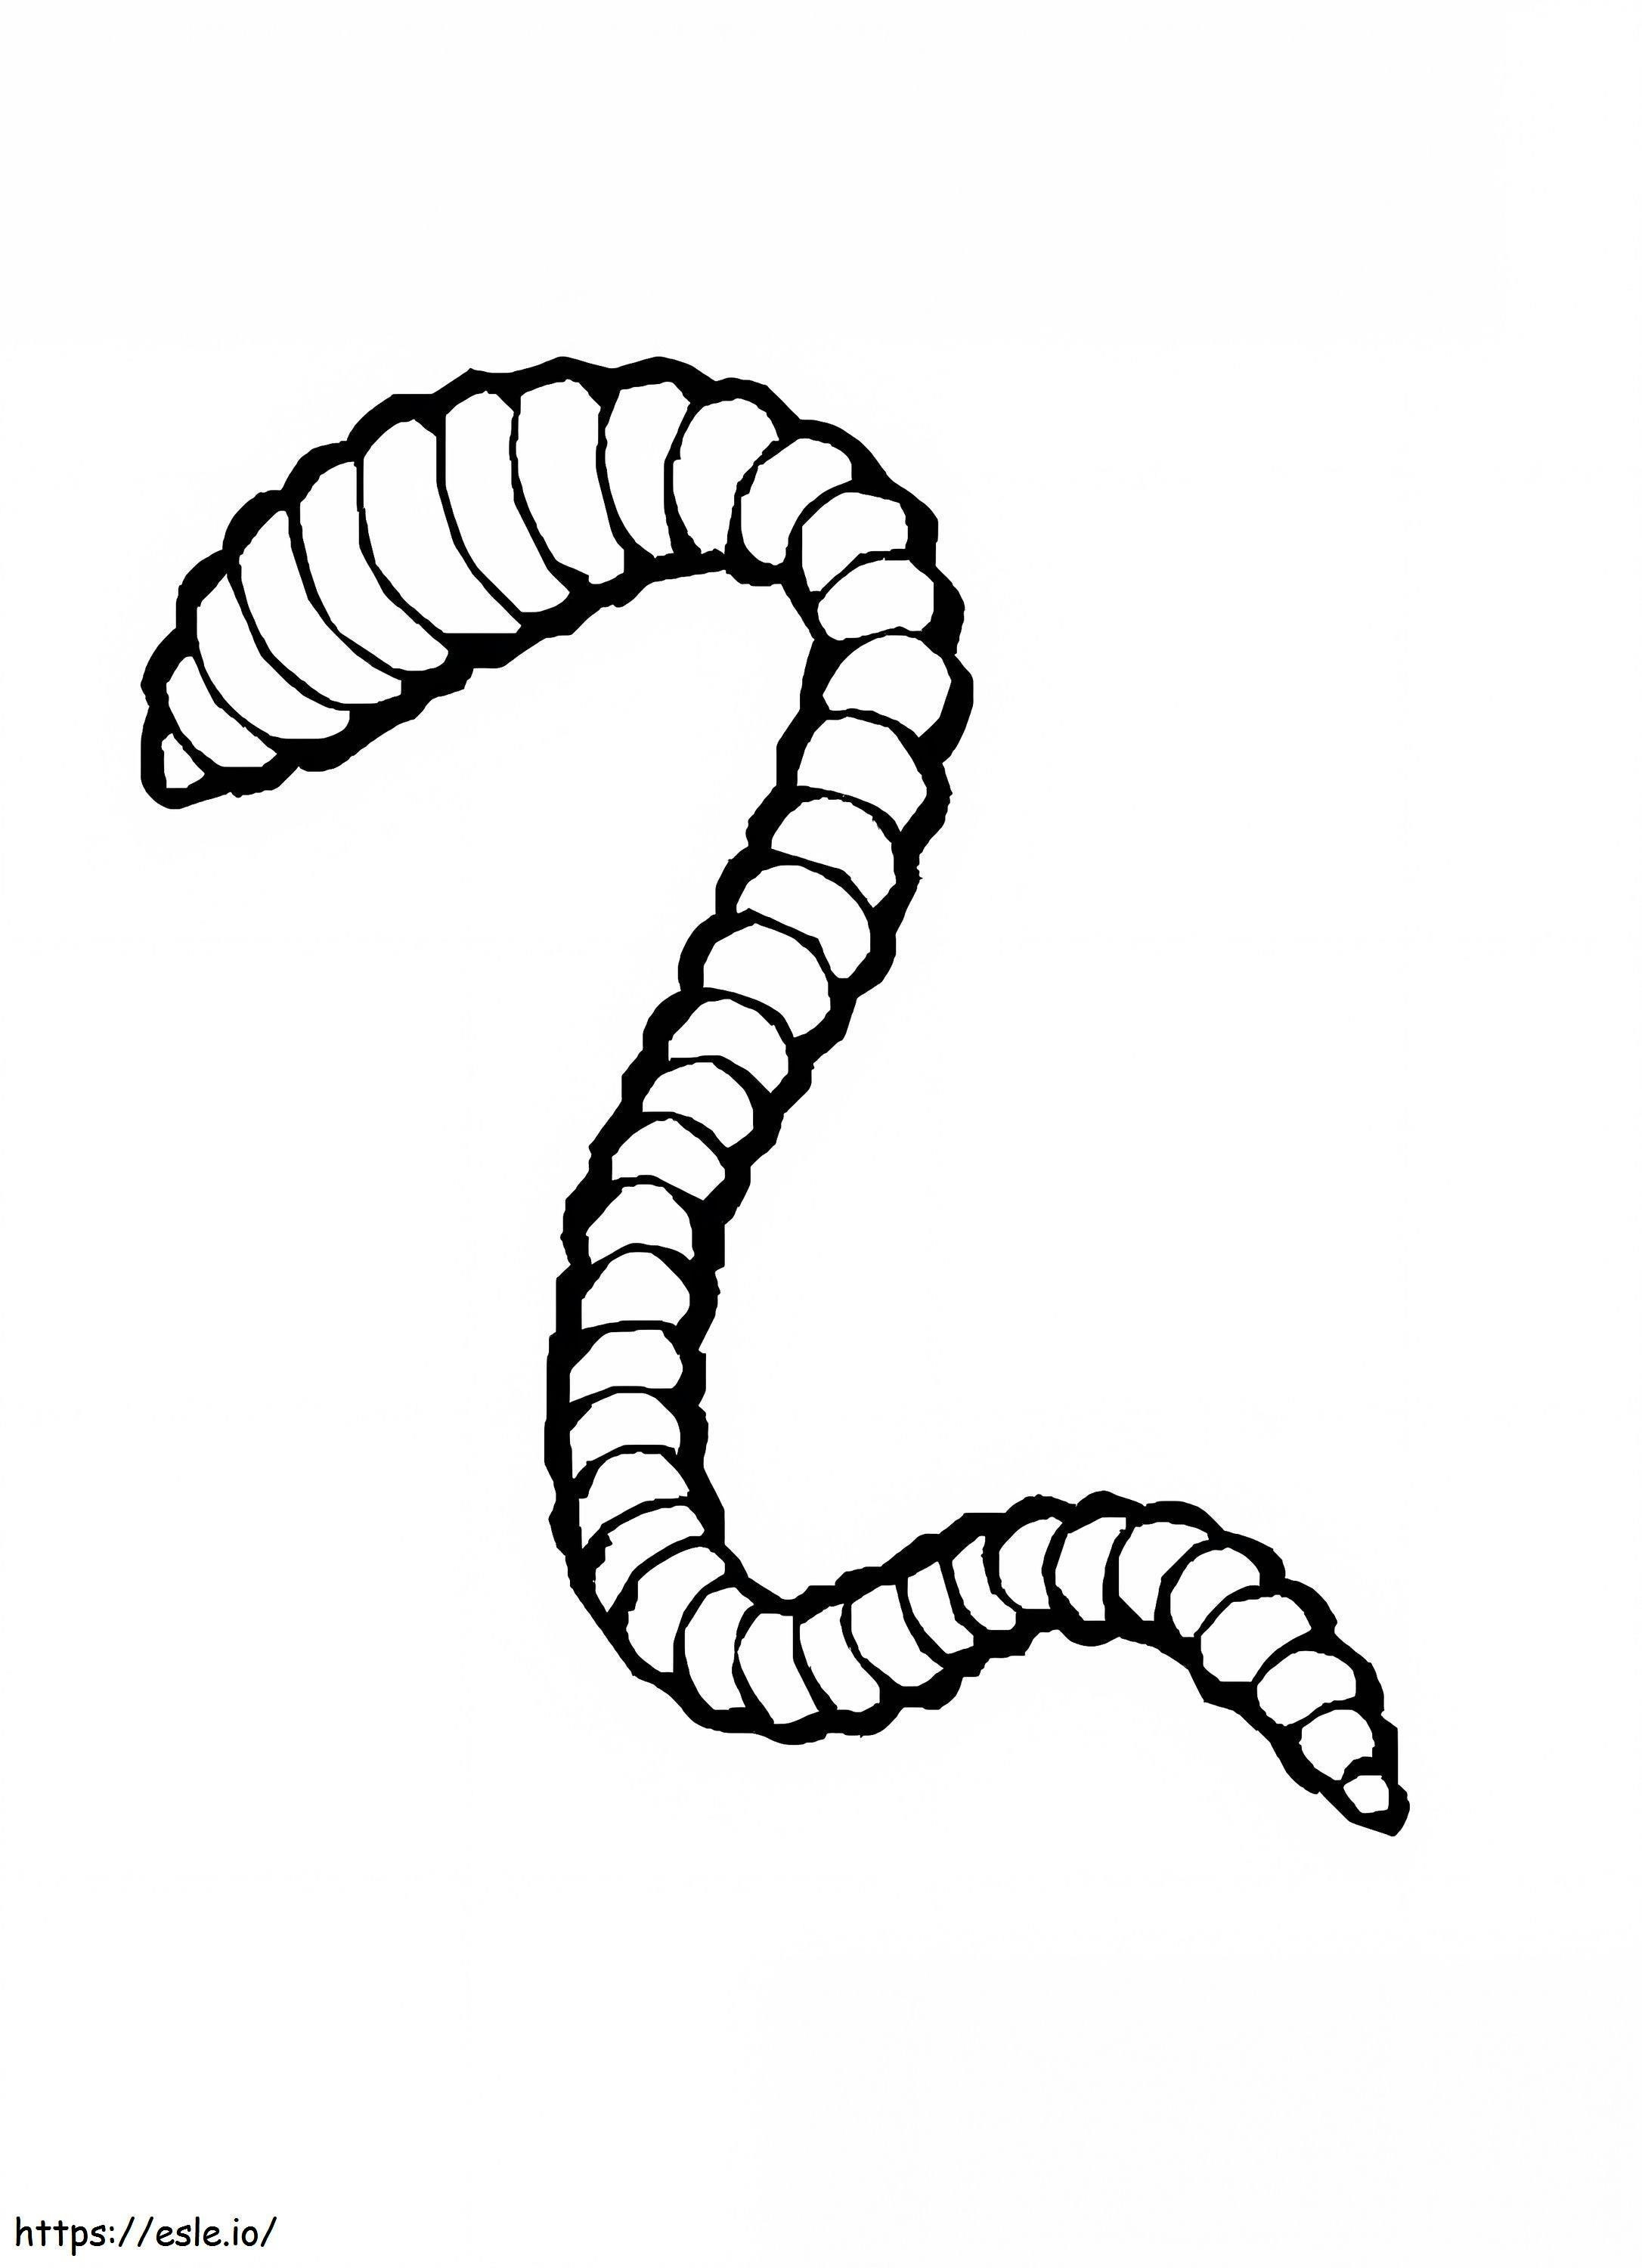 Earthworm 1 coloring page